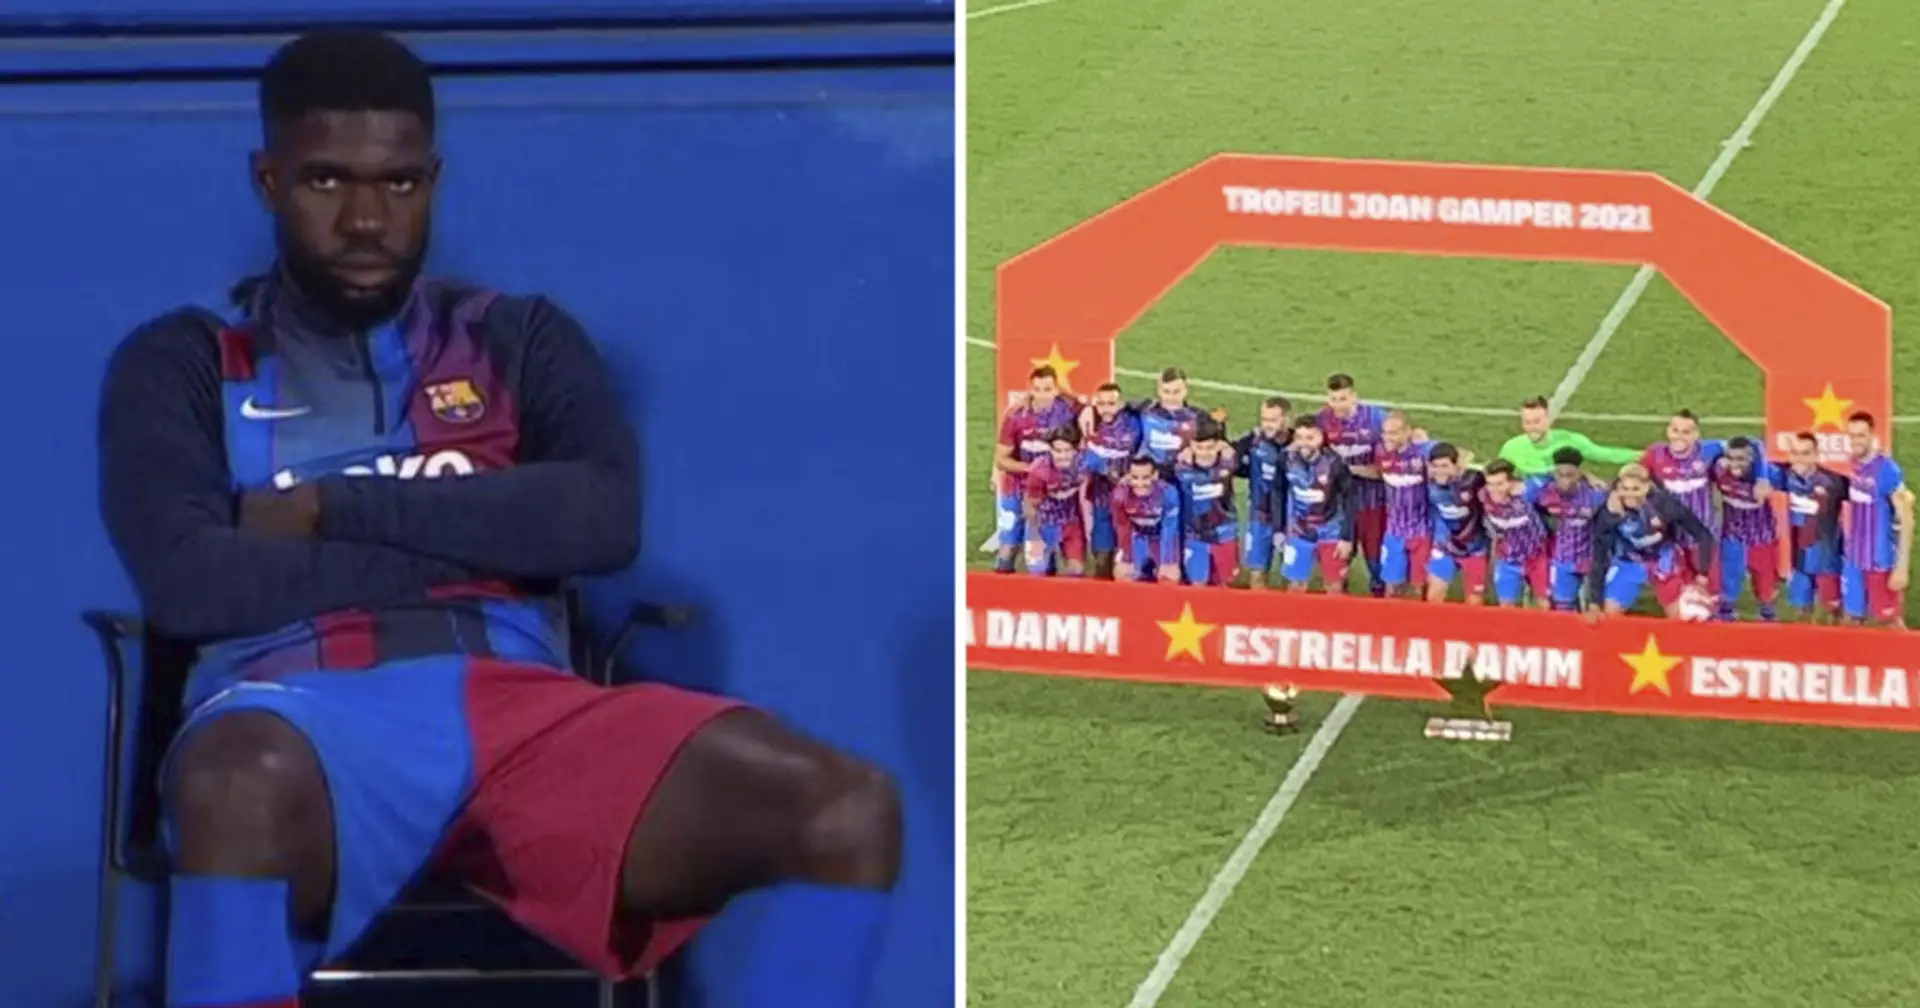 Umtiti 'very upset' about fans booing him, refuses to join group photo after Juventus win